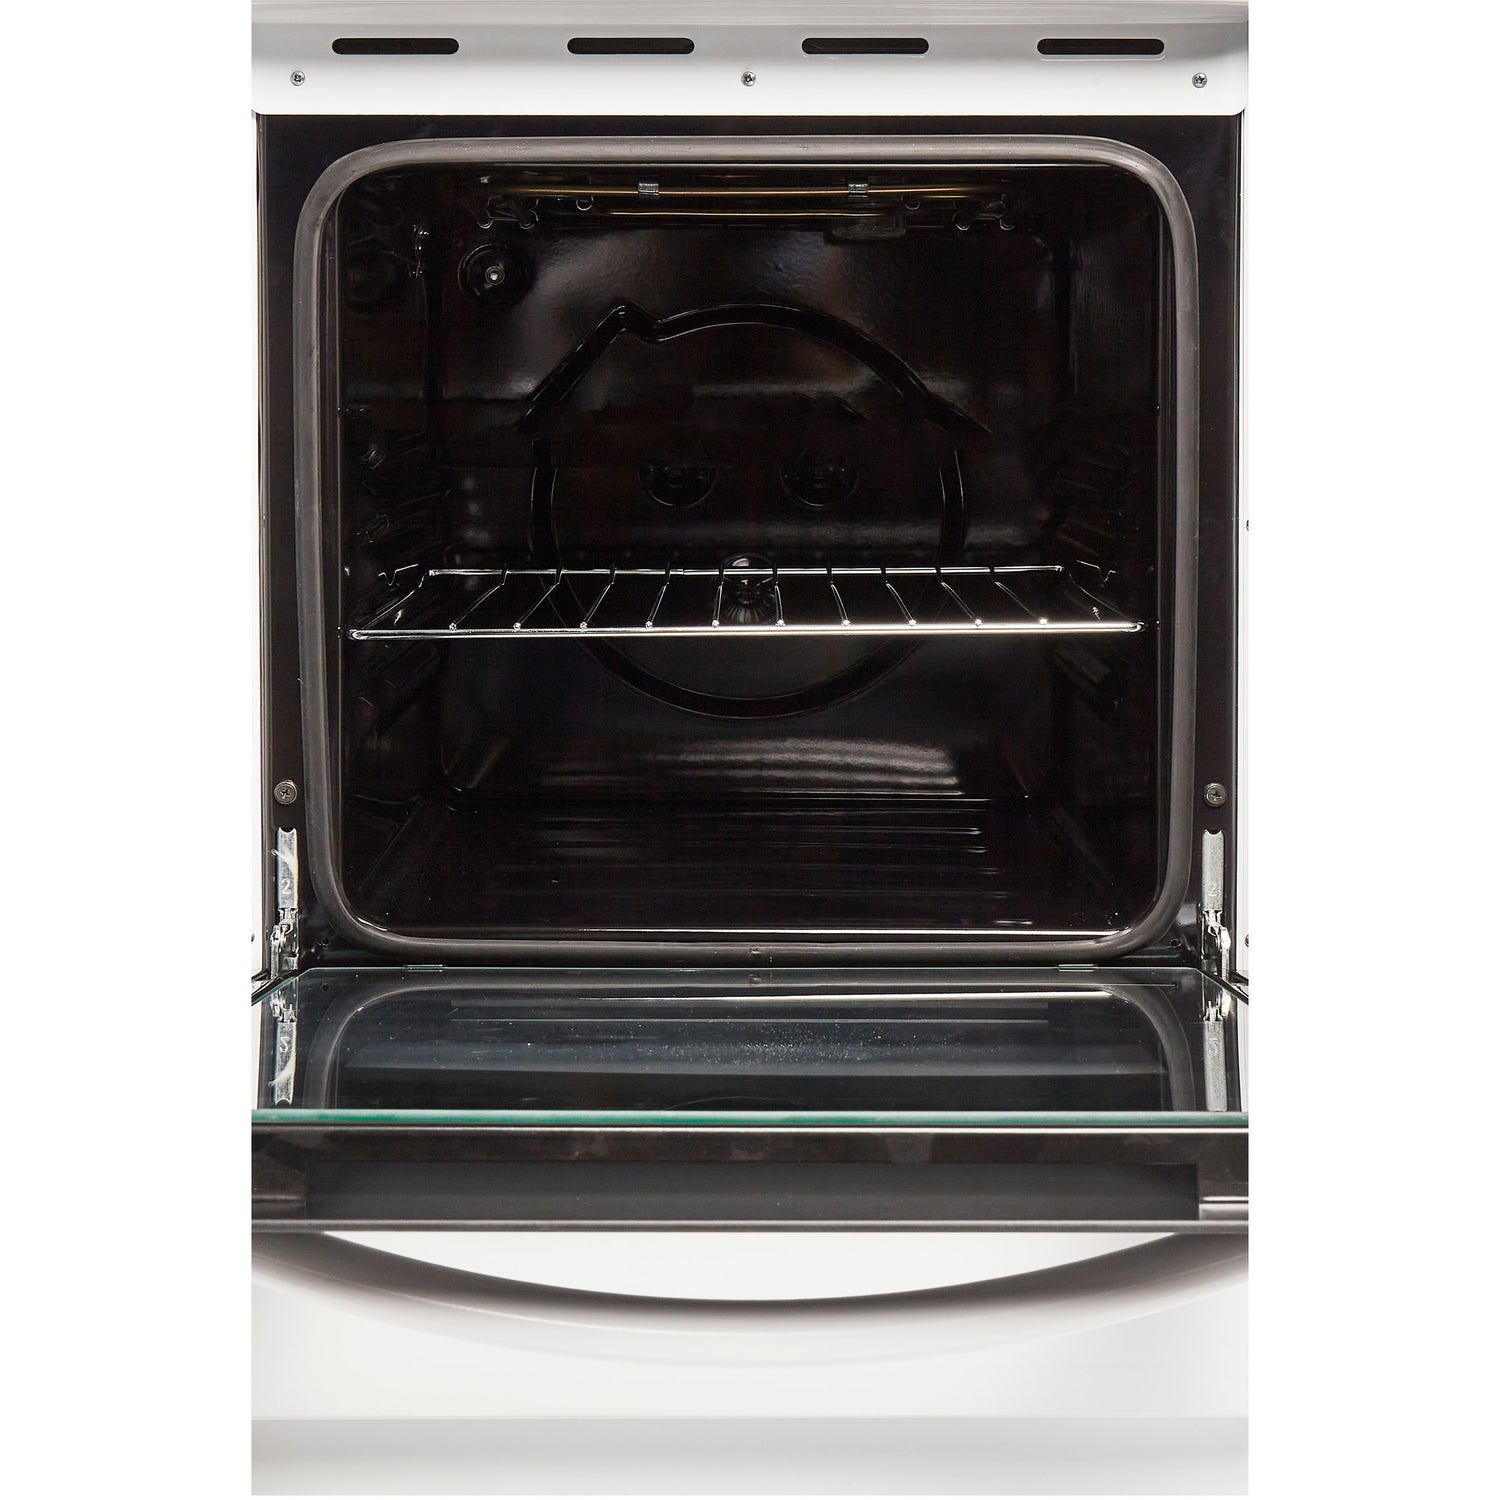 Haden HES50W 50cm Single Oven Electric Cooker - White - Yeomans Electrical